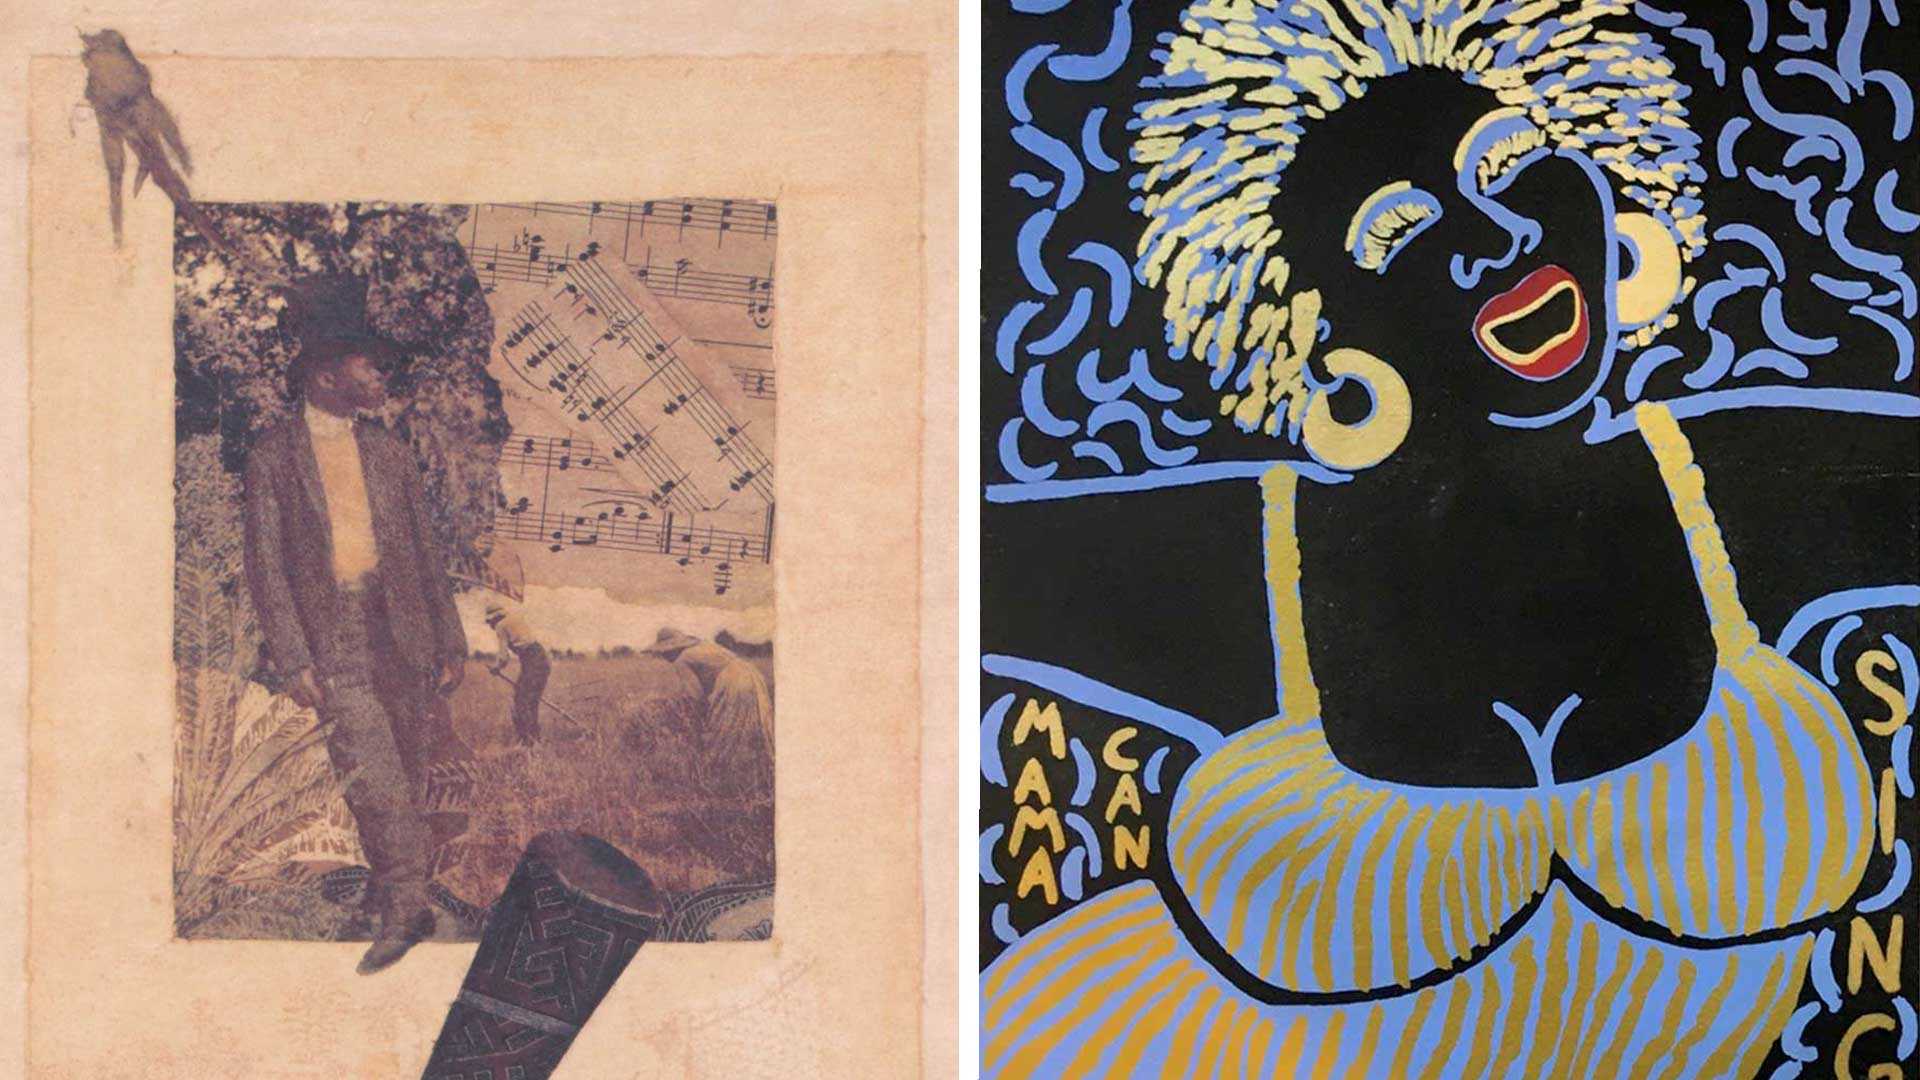  “High John De Conquer,” a 2000 serigraph by Betye Saar (left), and “Mama Can Sing,” a 2004 serigraph by Faith Ringgold (right), are part of “Meeting on the Matrix,” a new exhibit at the David C. Driskell Center that brings together these two artists for the first time, juxtaposing their different ways of approaching the Black experience in America.